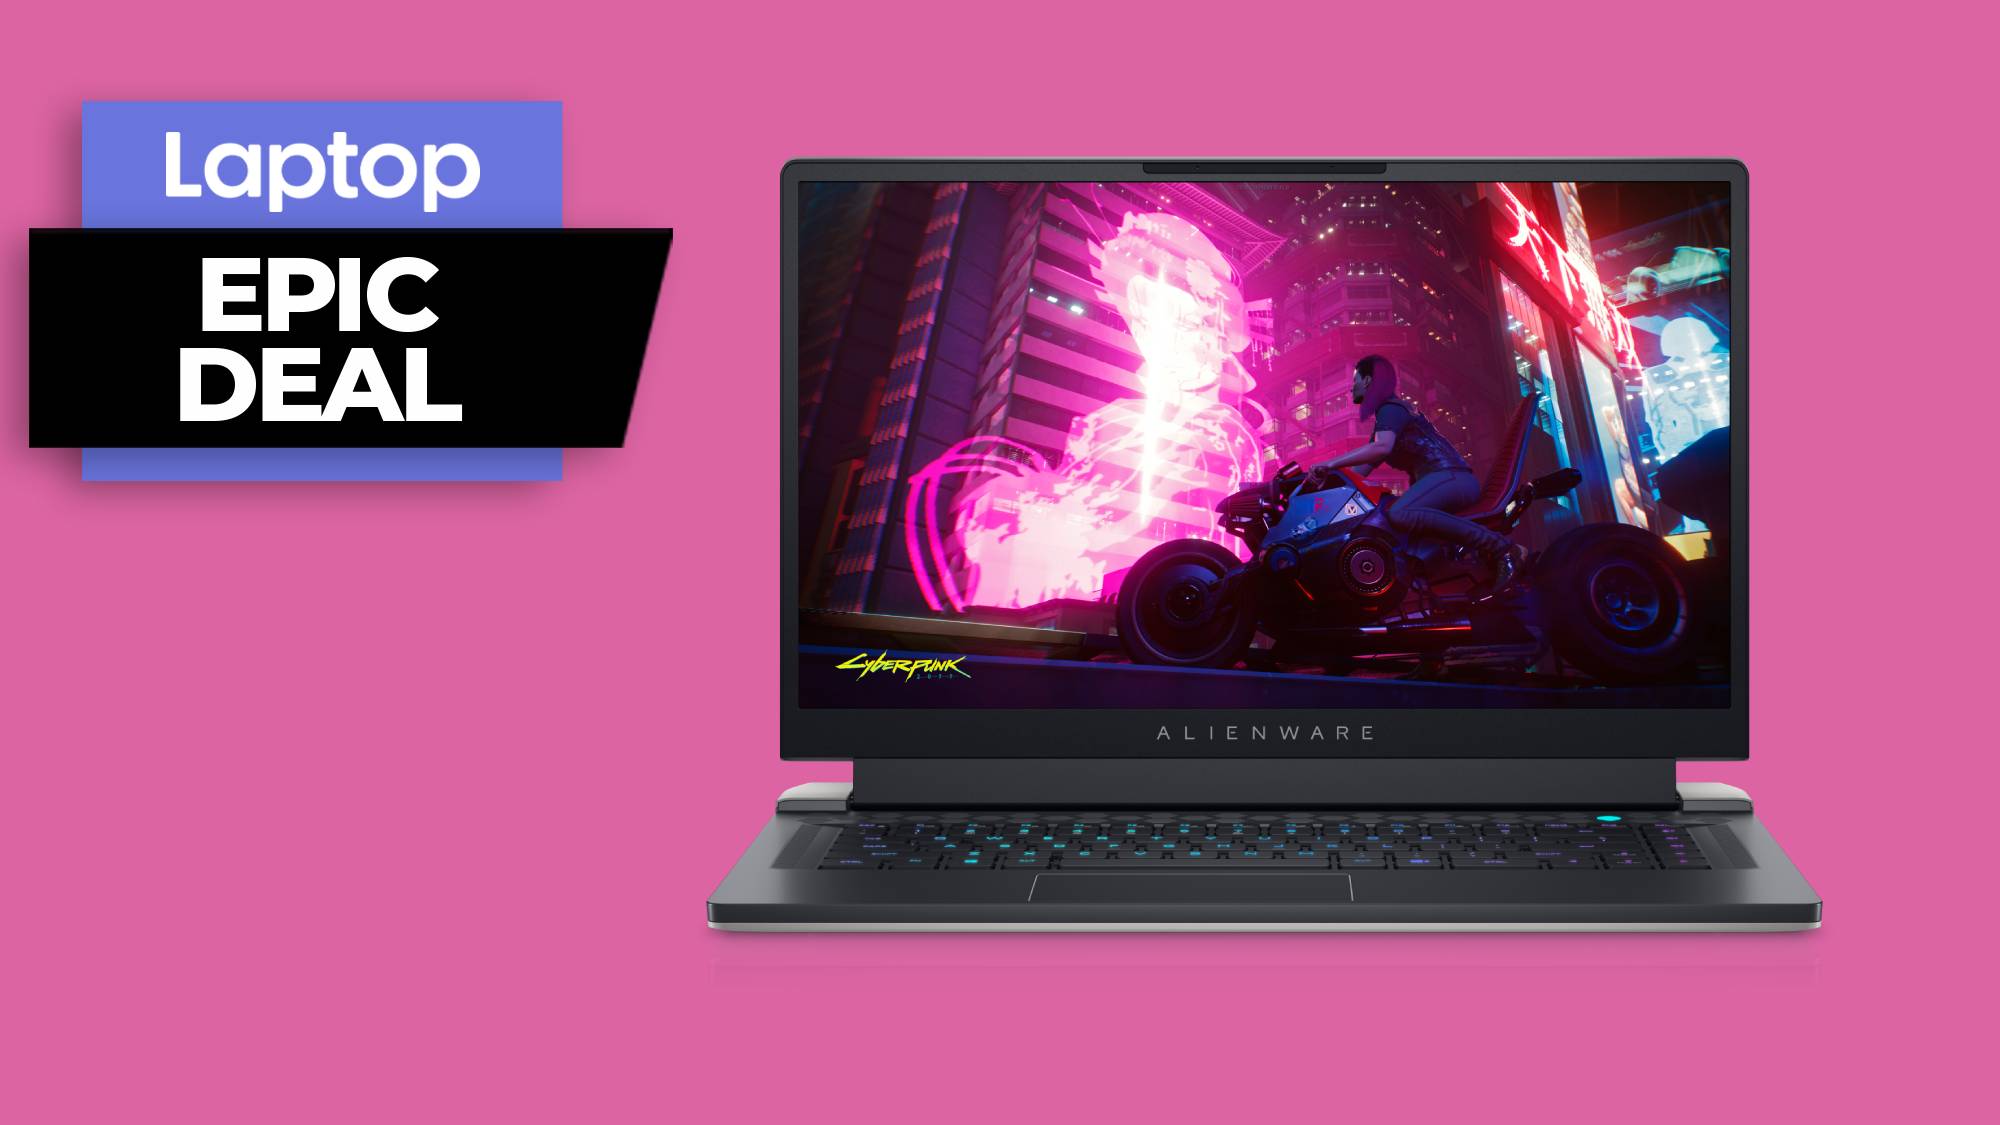 Alienware x15 gaming laptop gets $850 price cut in rare Dell flash deal |  Laptop Mag